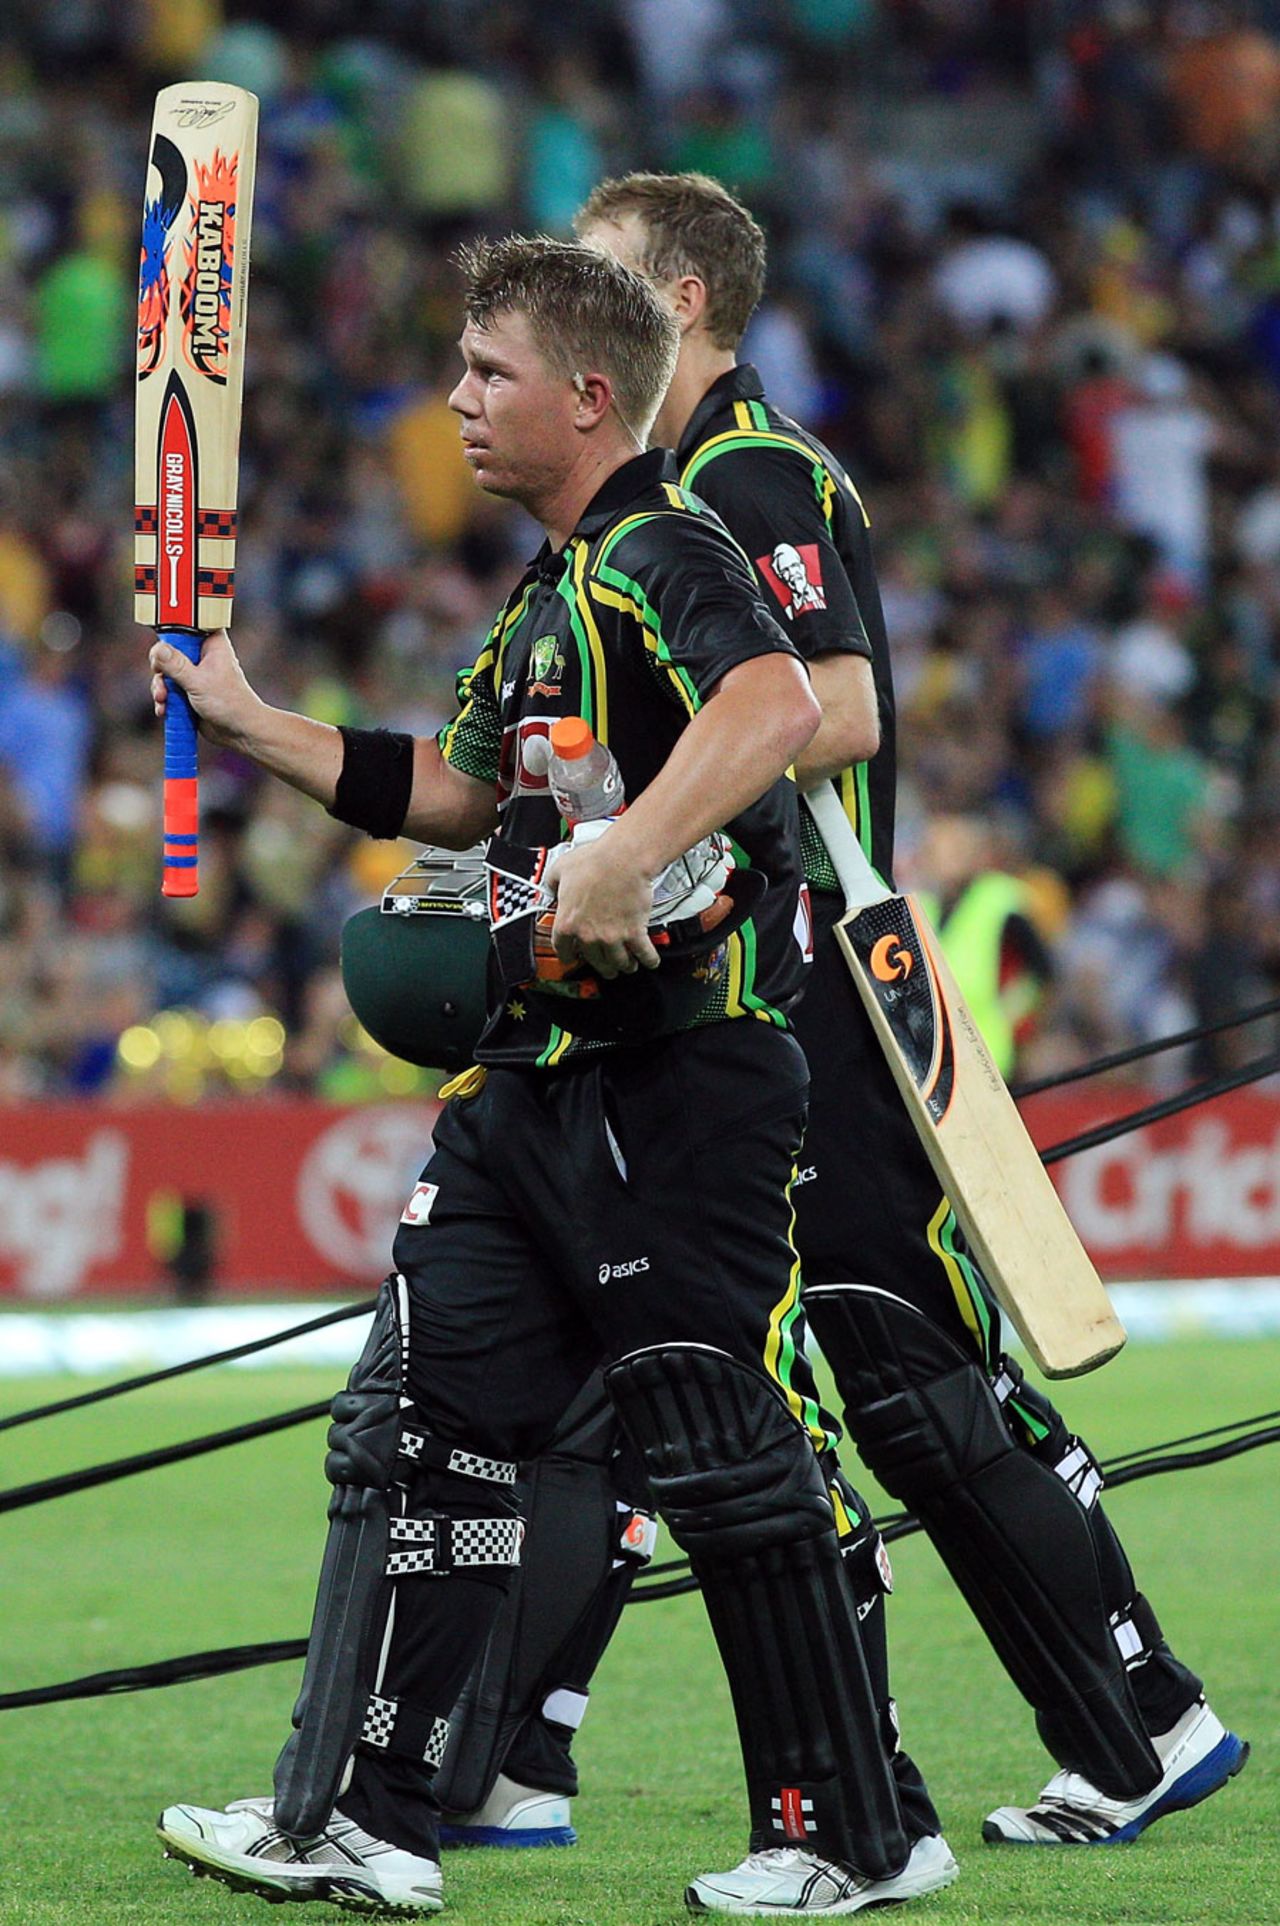 David Warner acknowledges the crowd after making an unbeaten 90, 1st T20, Sydney, January 26, 2013